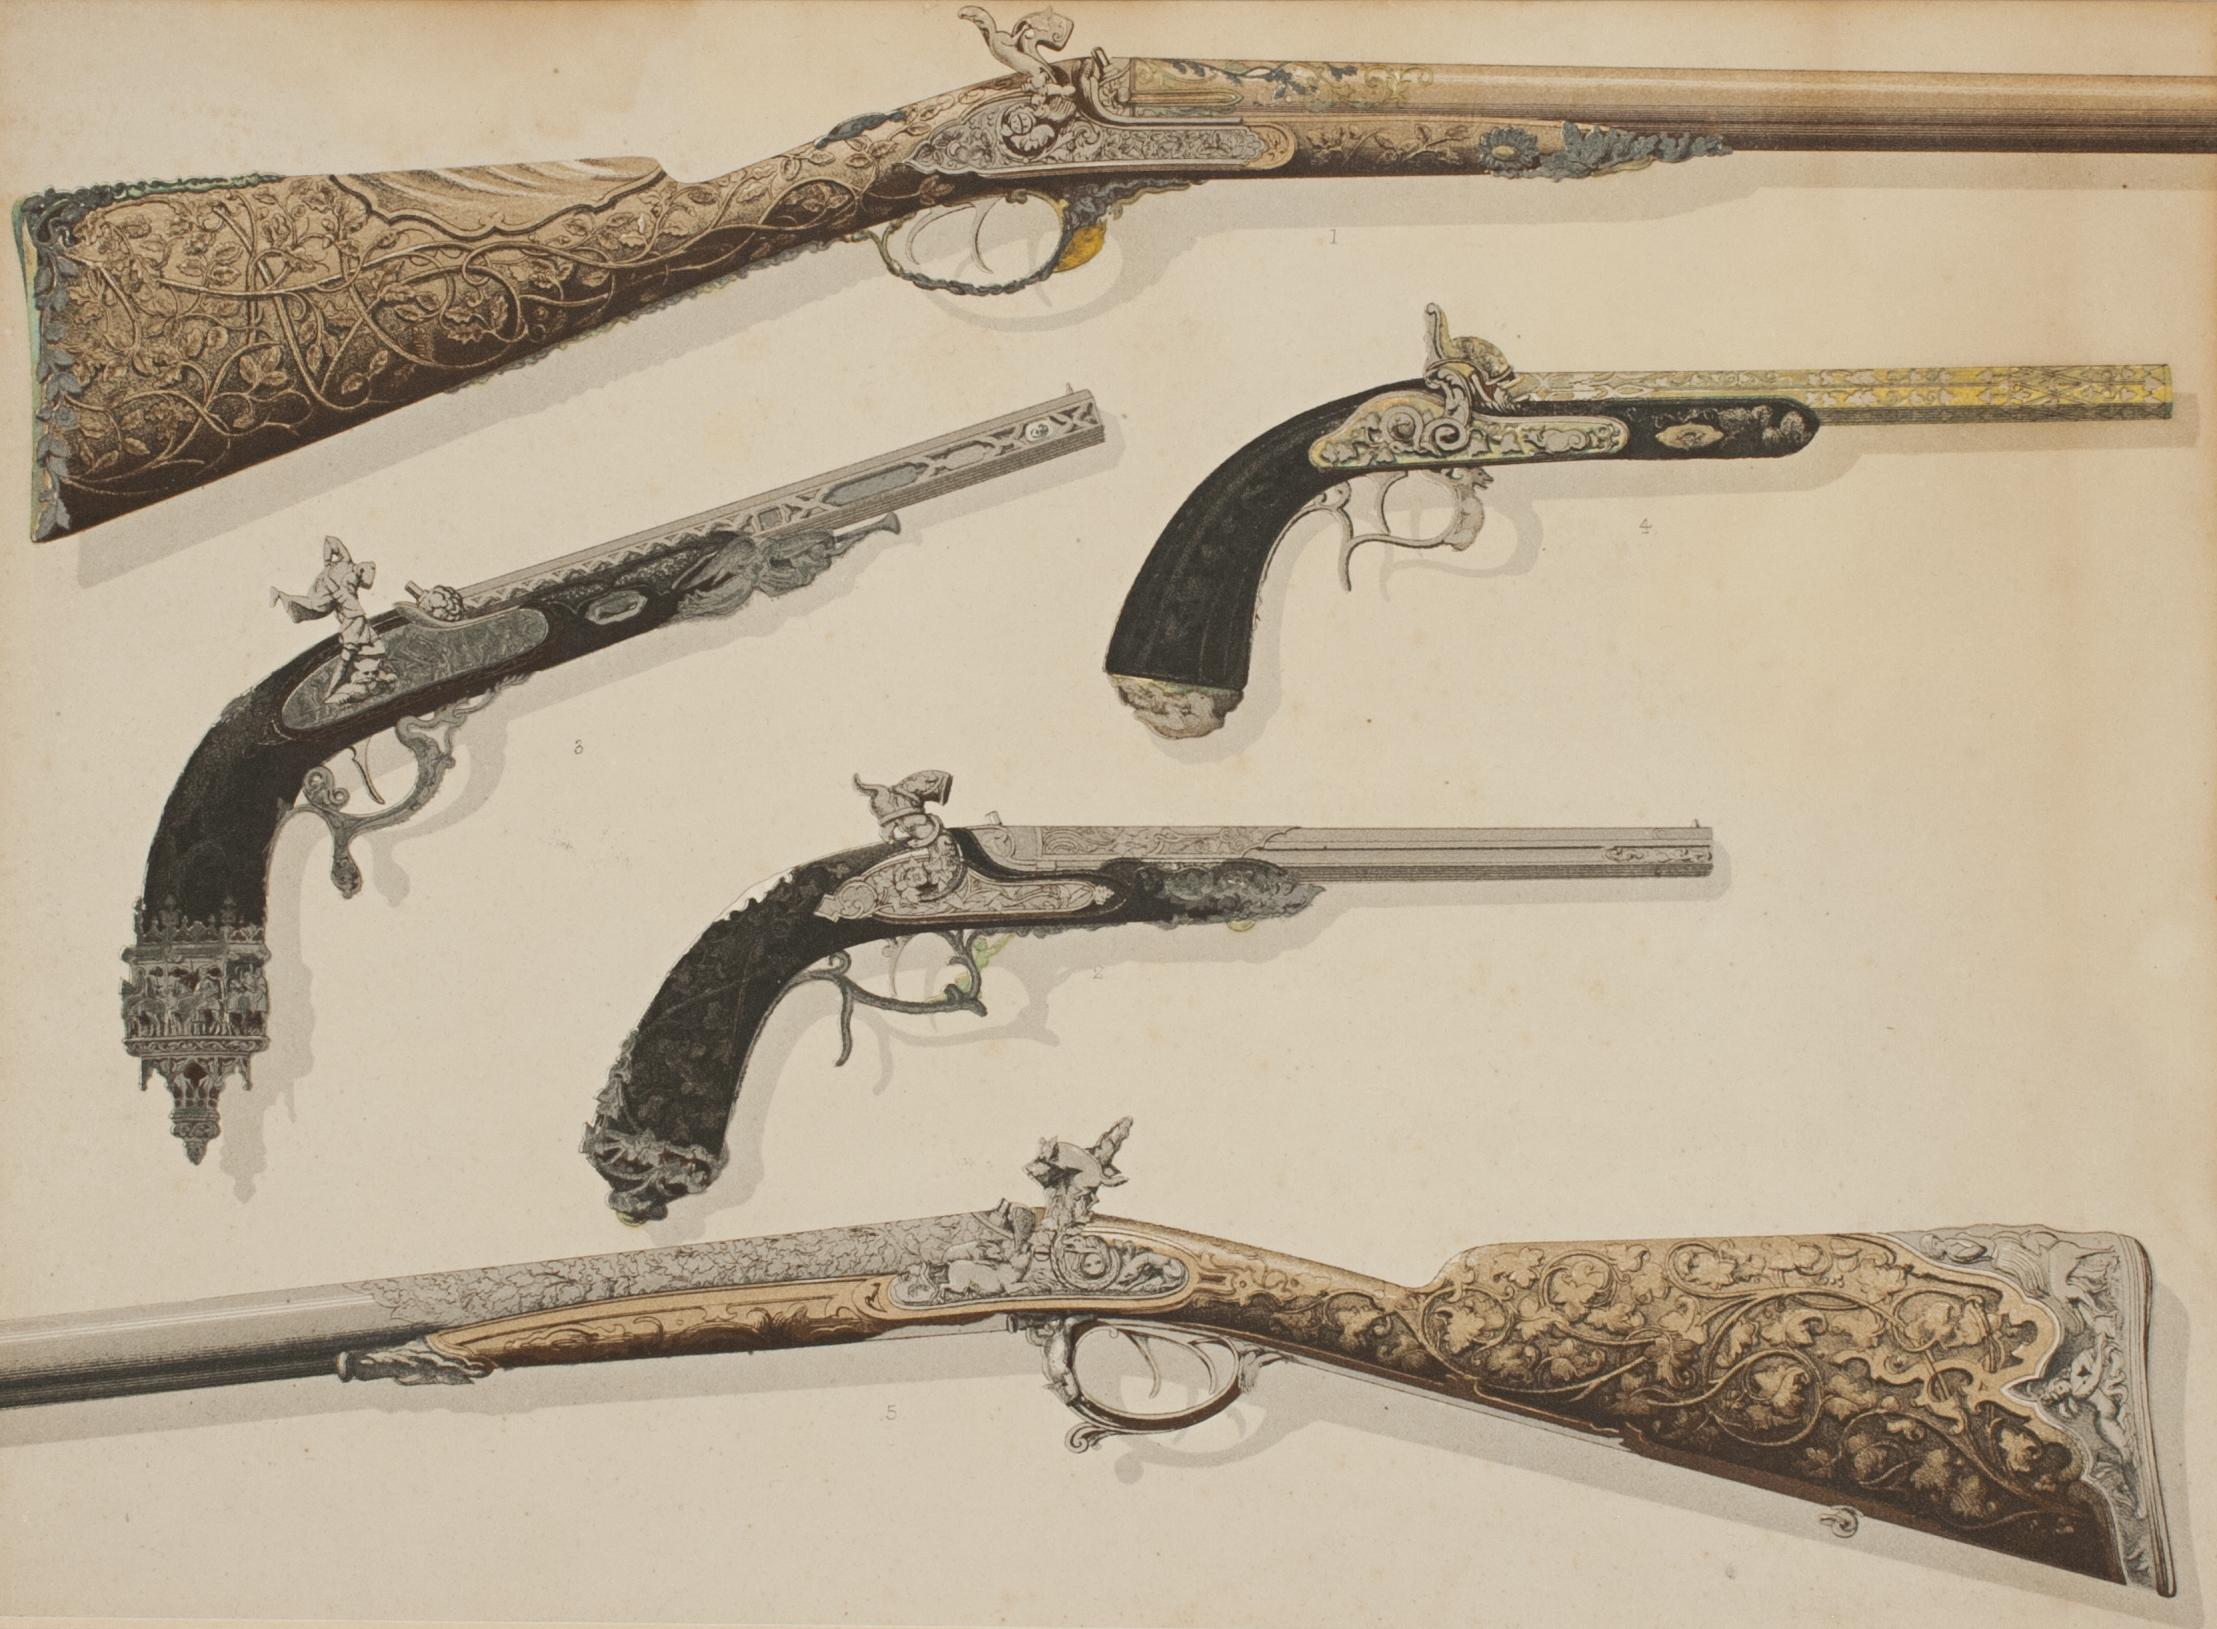 Pair of Antique Firearms, Guns, Pistols and Revolvers and Rifles Prints 1